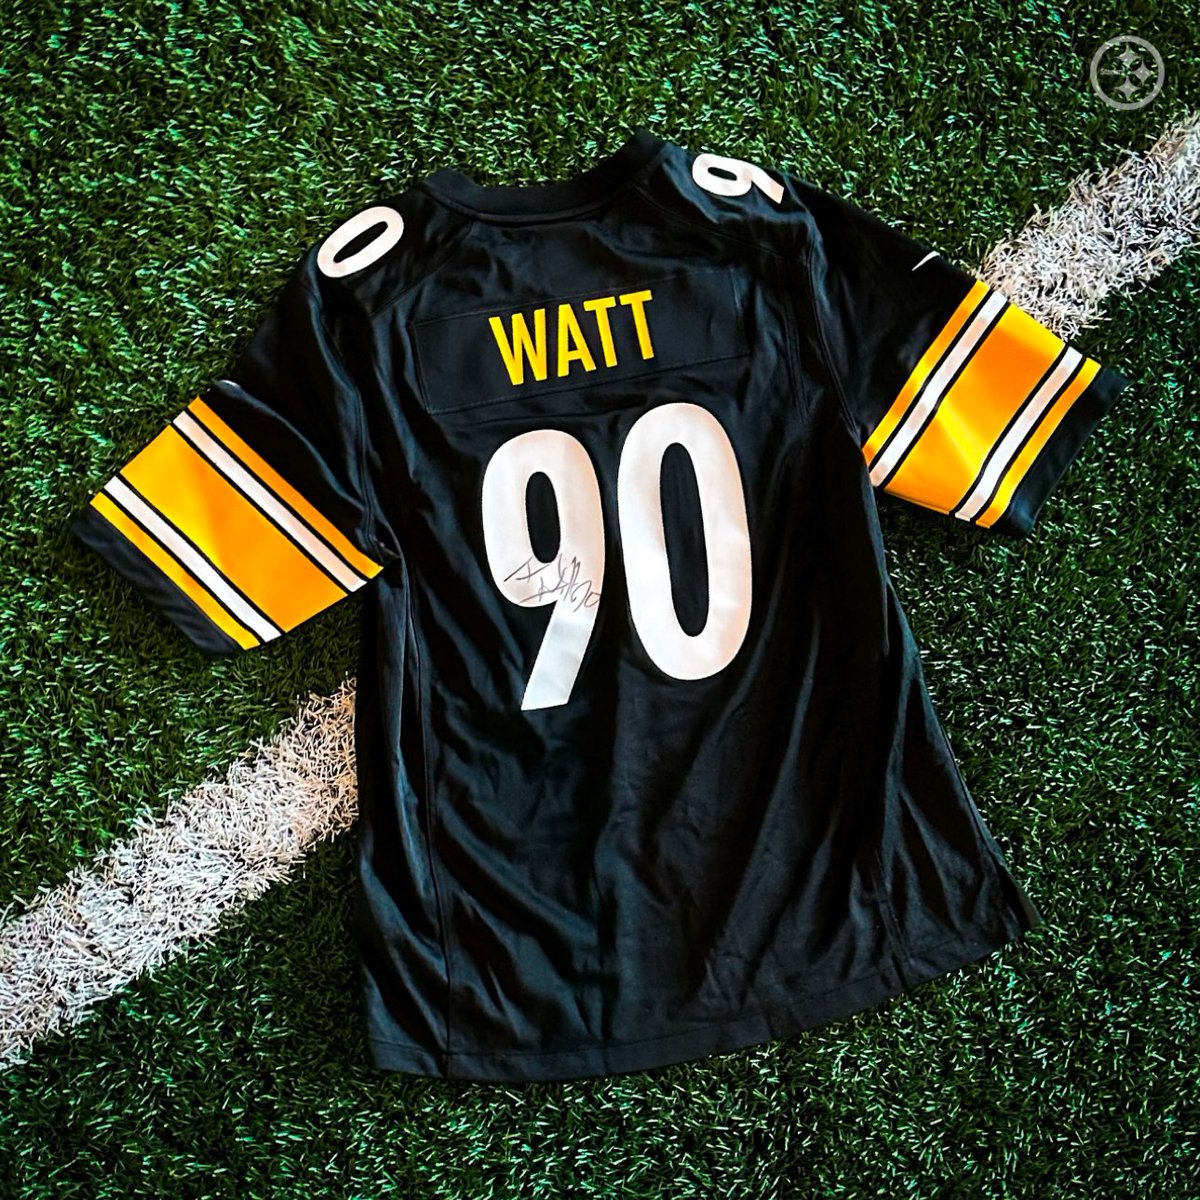 Wrapping up #412Day with a signed @_TJWatt jersey 🙌 RT if you want it ‼️